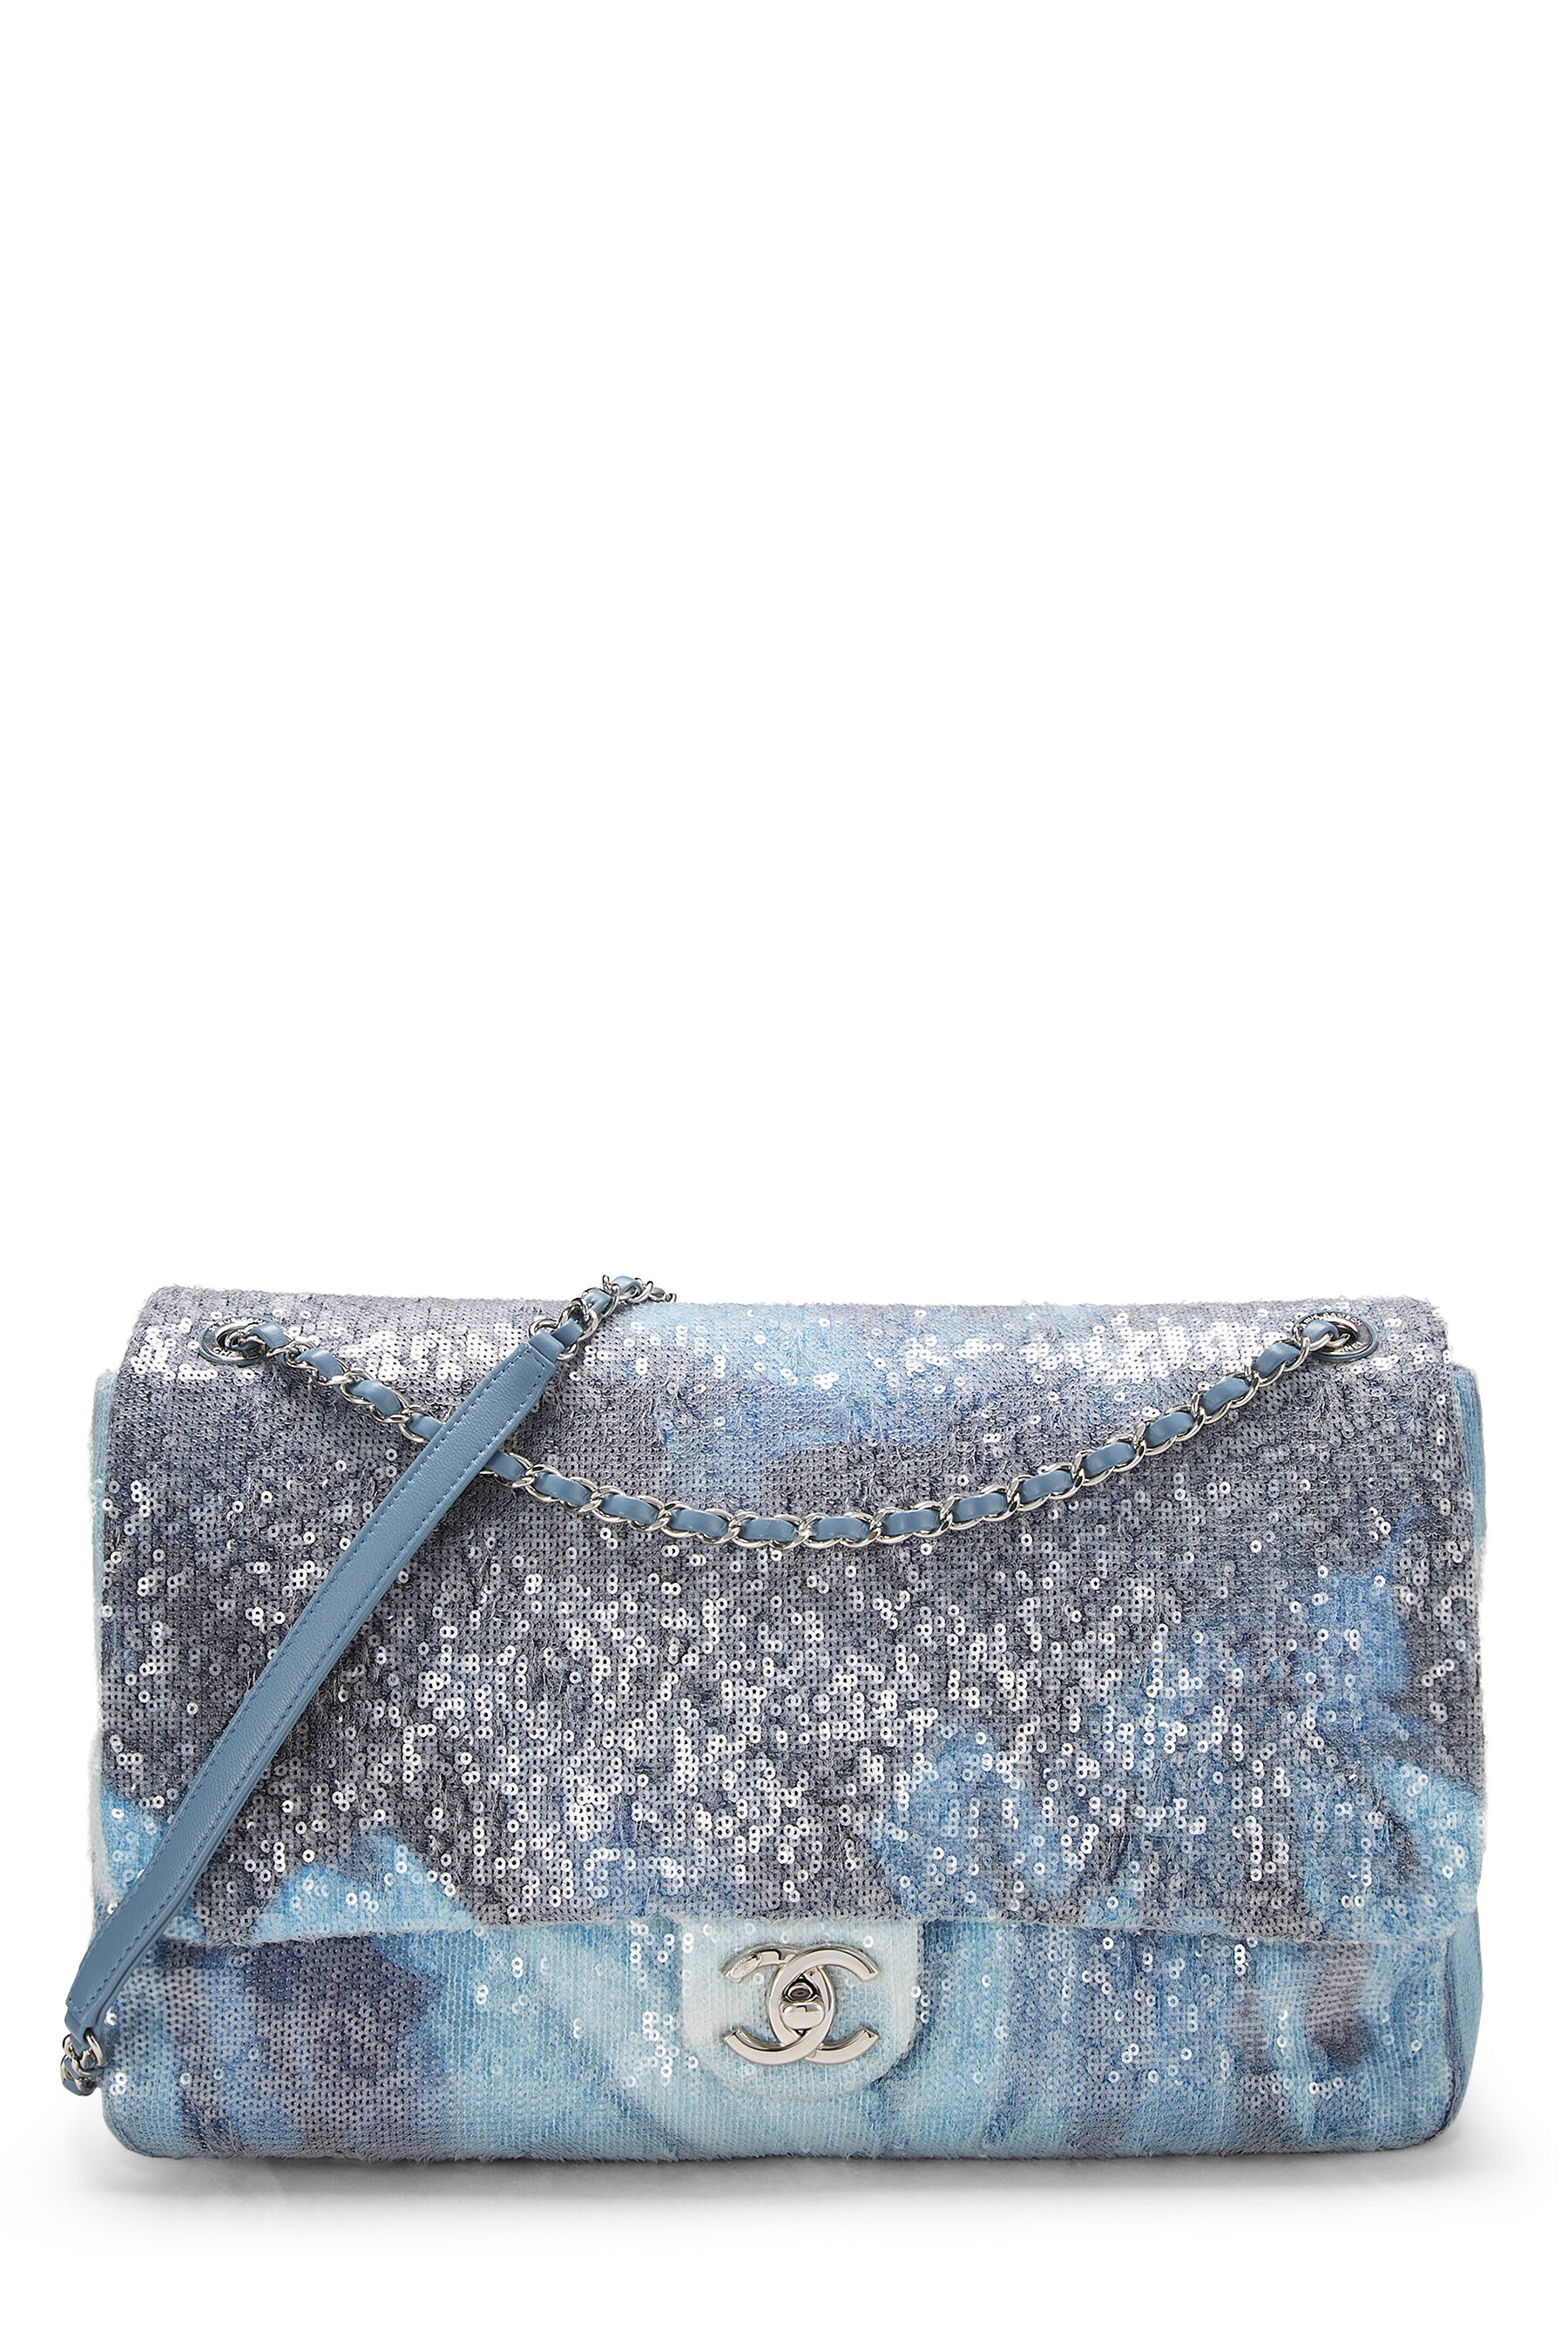 CHANEL Sequin Large Waterfall Flap Light Blue 638843